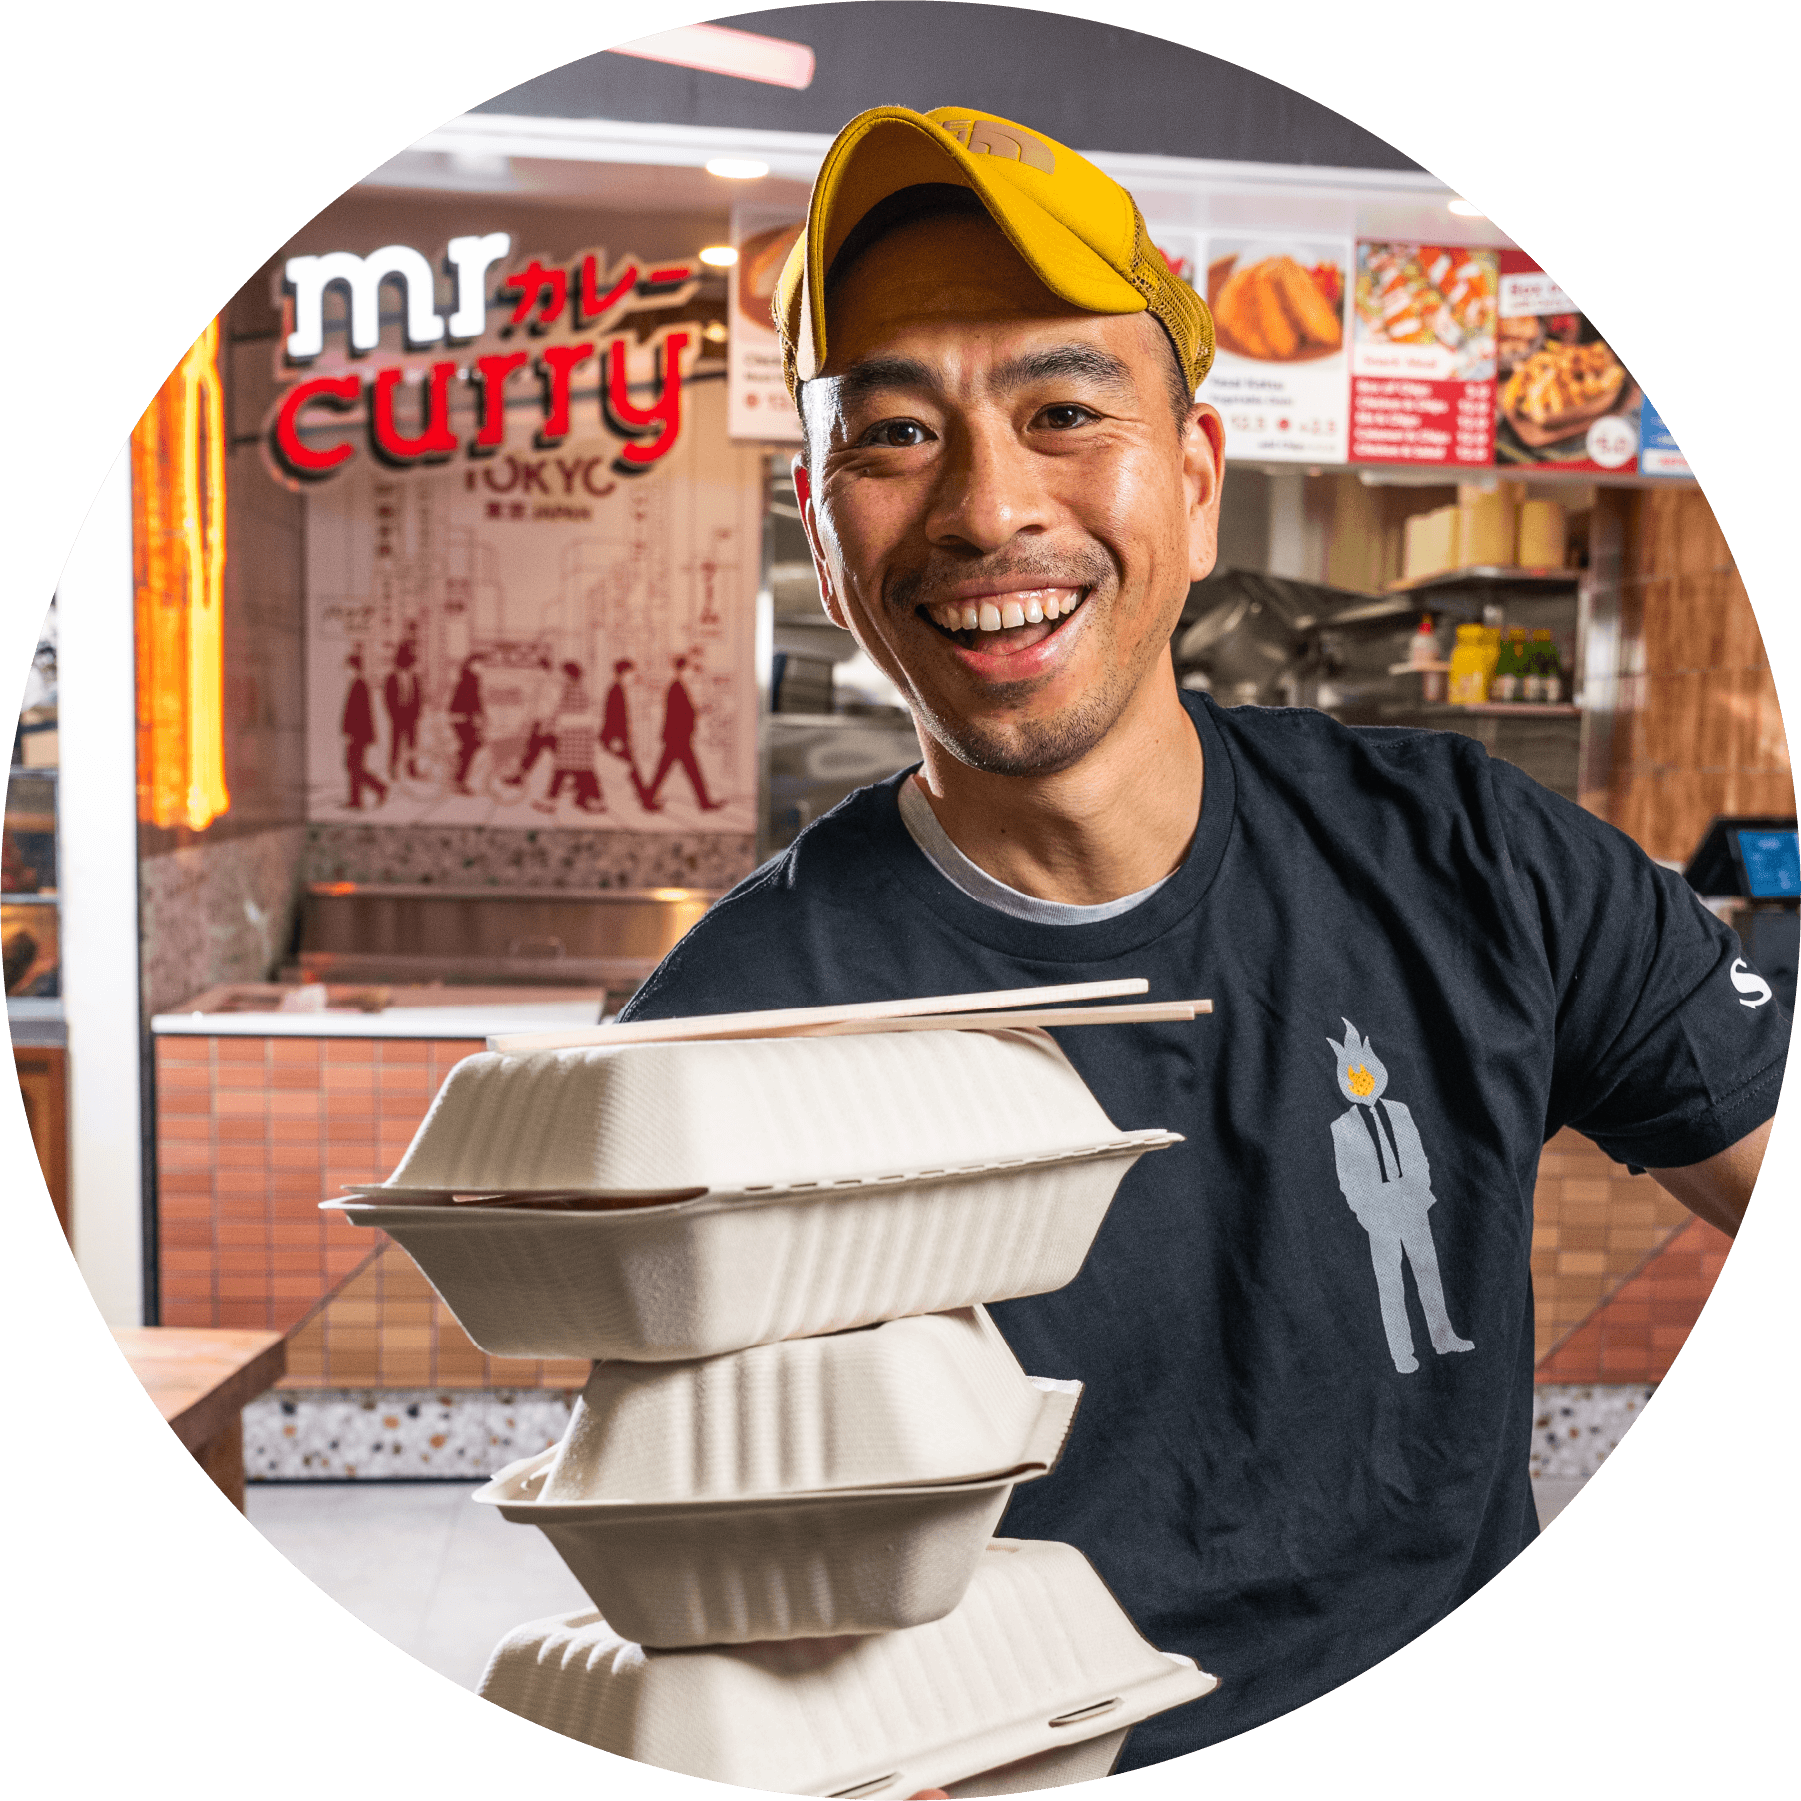 Post Office Square | Mr Curry brings a taste of Japan to Brisbane CBD